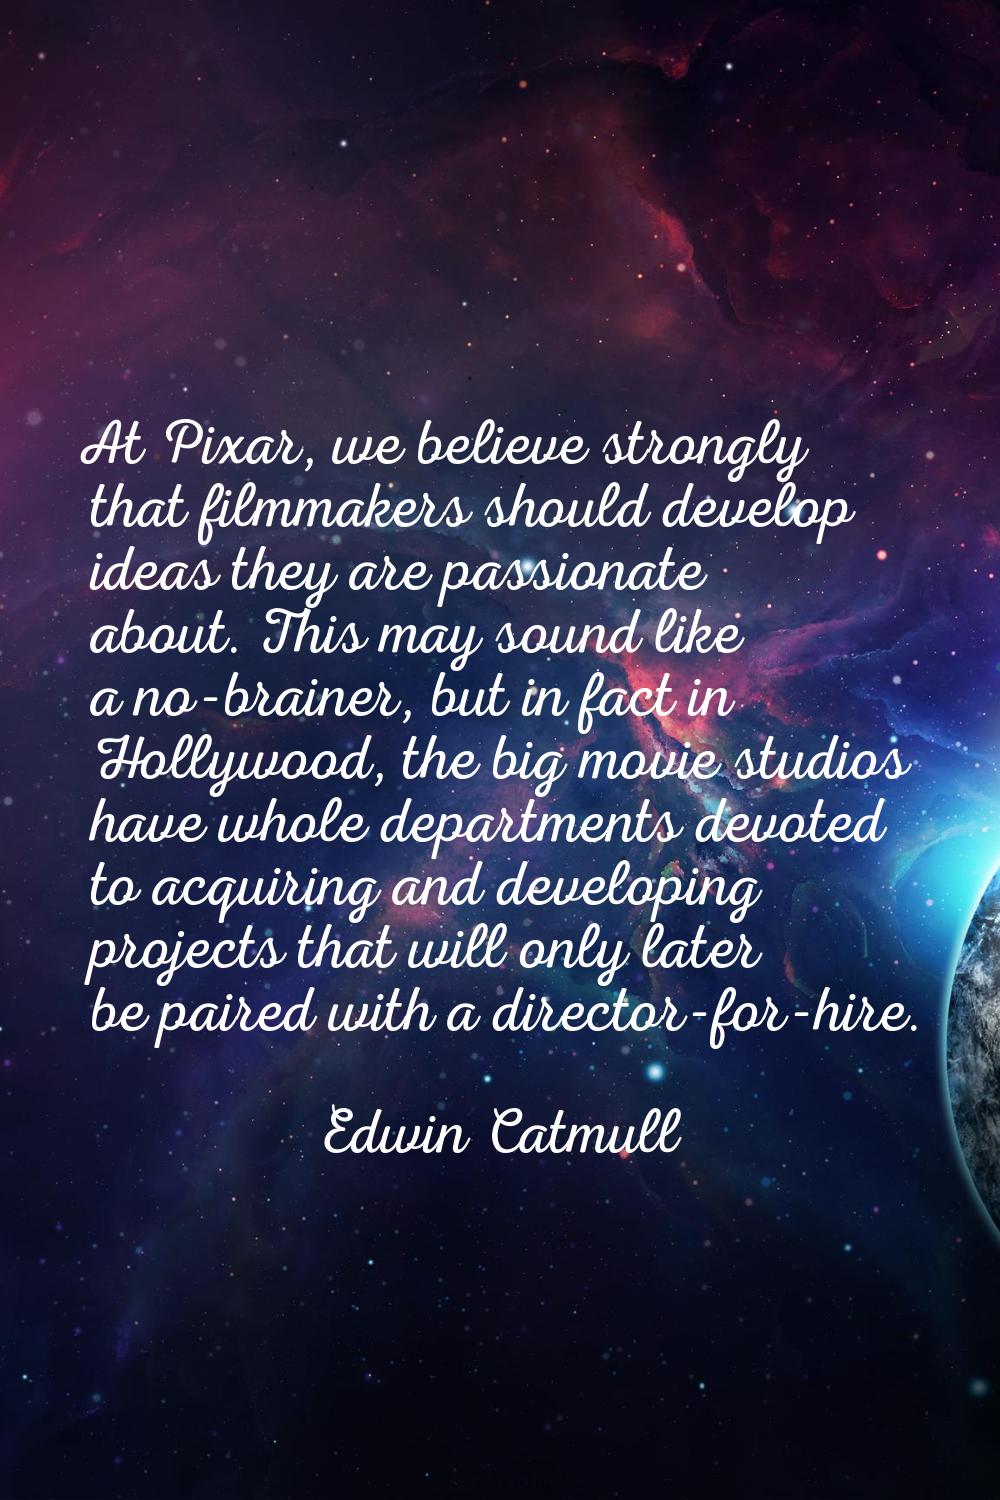 At Pixar, we believe strongly that filmmakers should develop ideas they are passionate about. This 